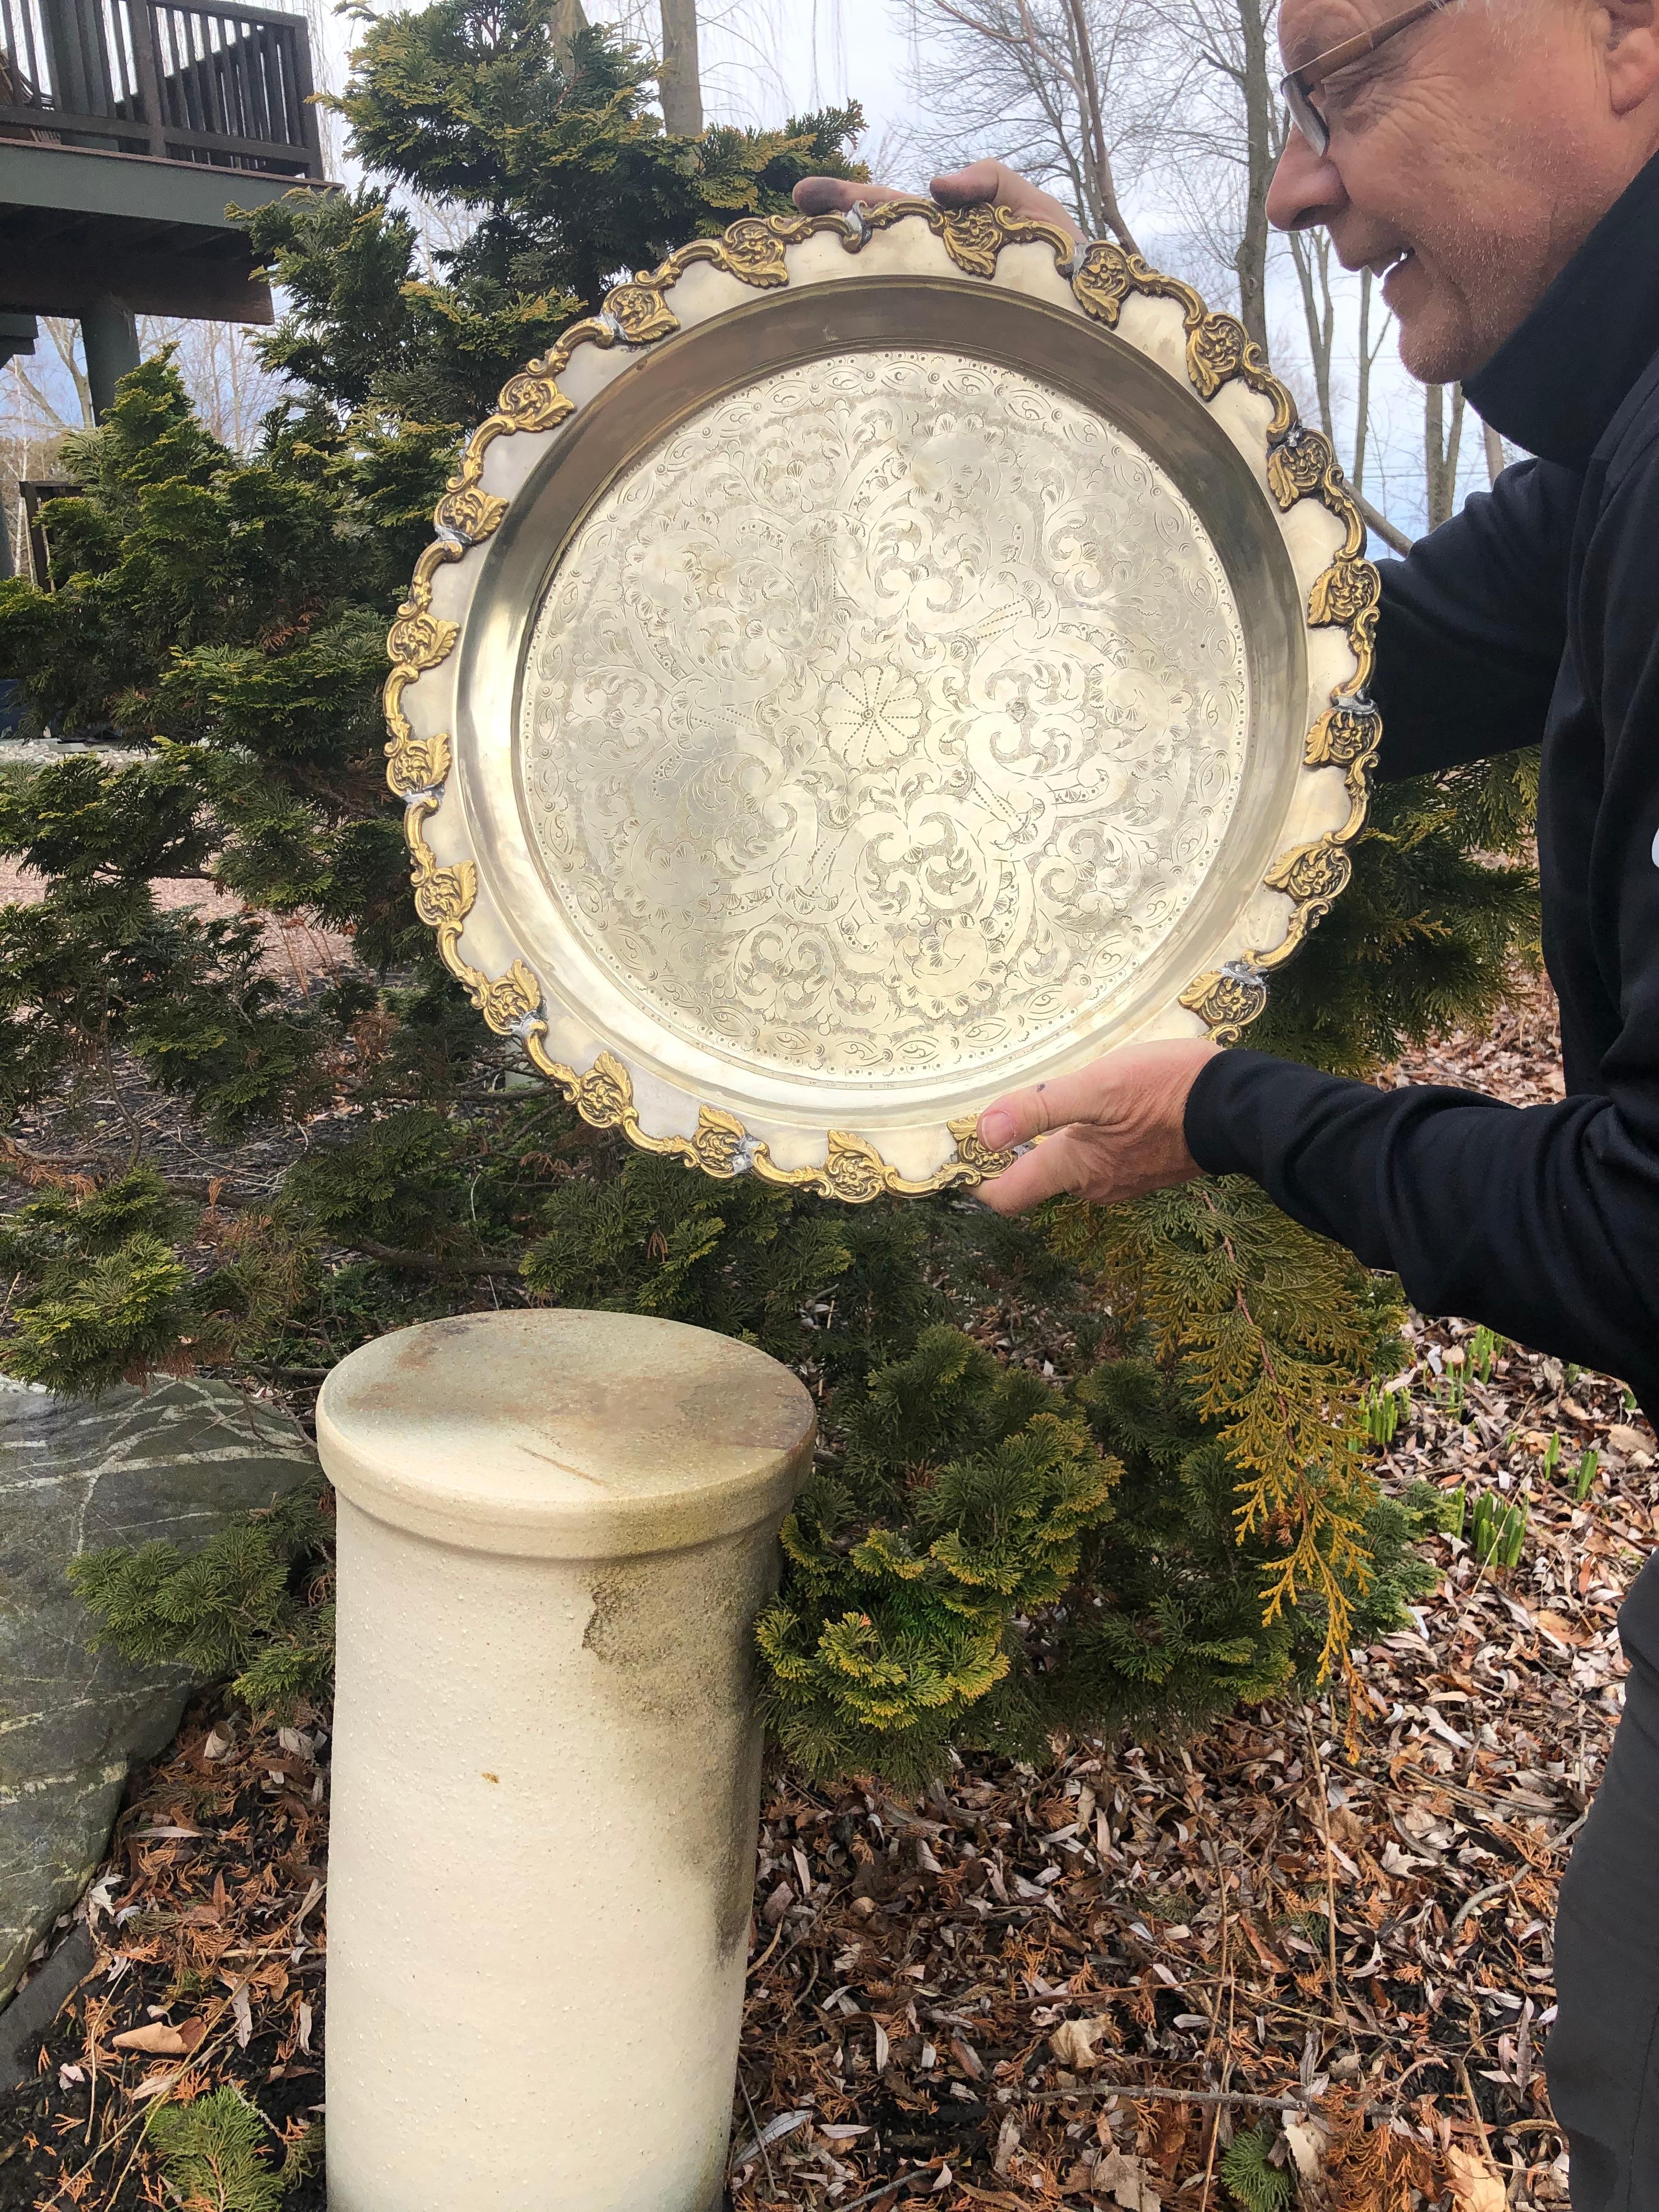 Flowers galore

From an old Moroccan collection comes this beautiful large round engraved and hand-hammered tray, signed by its maker in a silver finish. The incised floriate surface designs are hand chiseled and pleasingly decorative.

This is